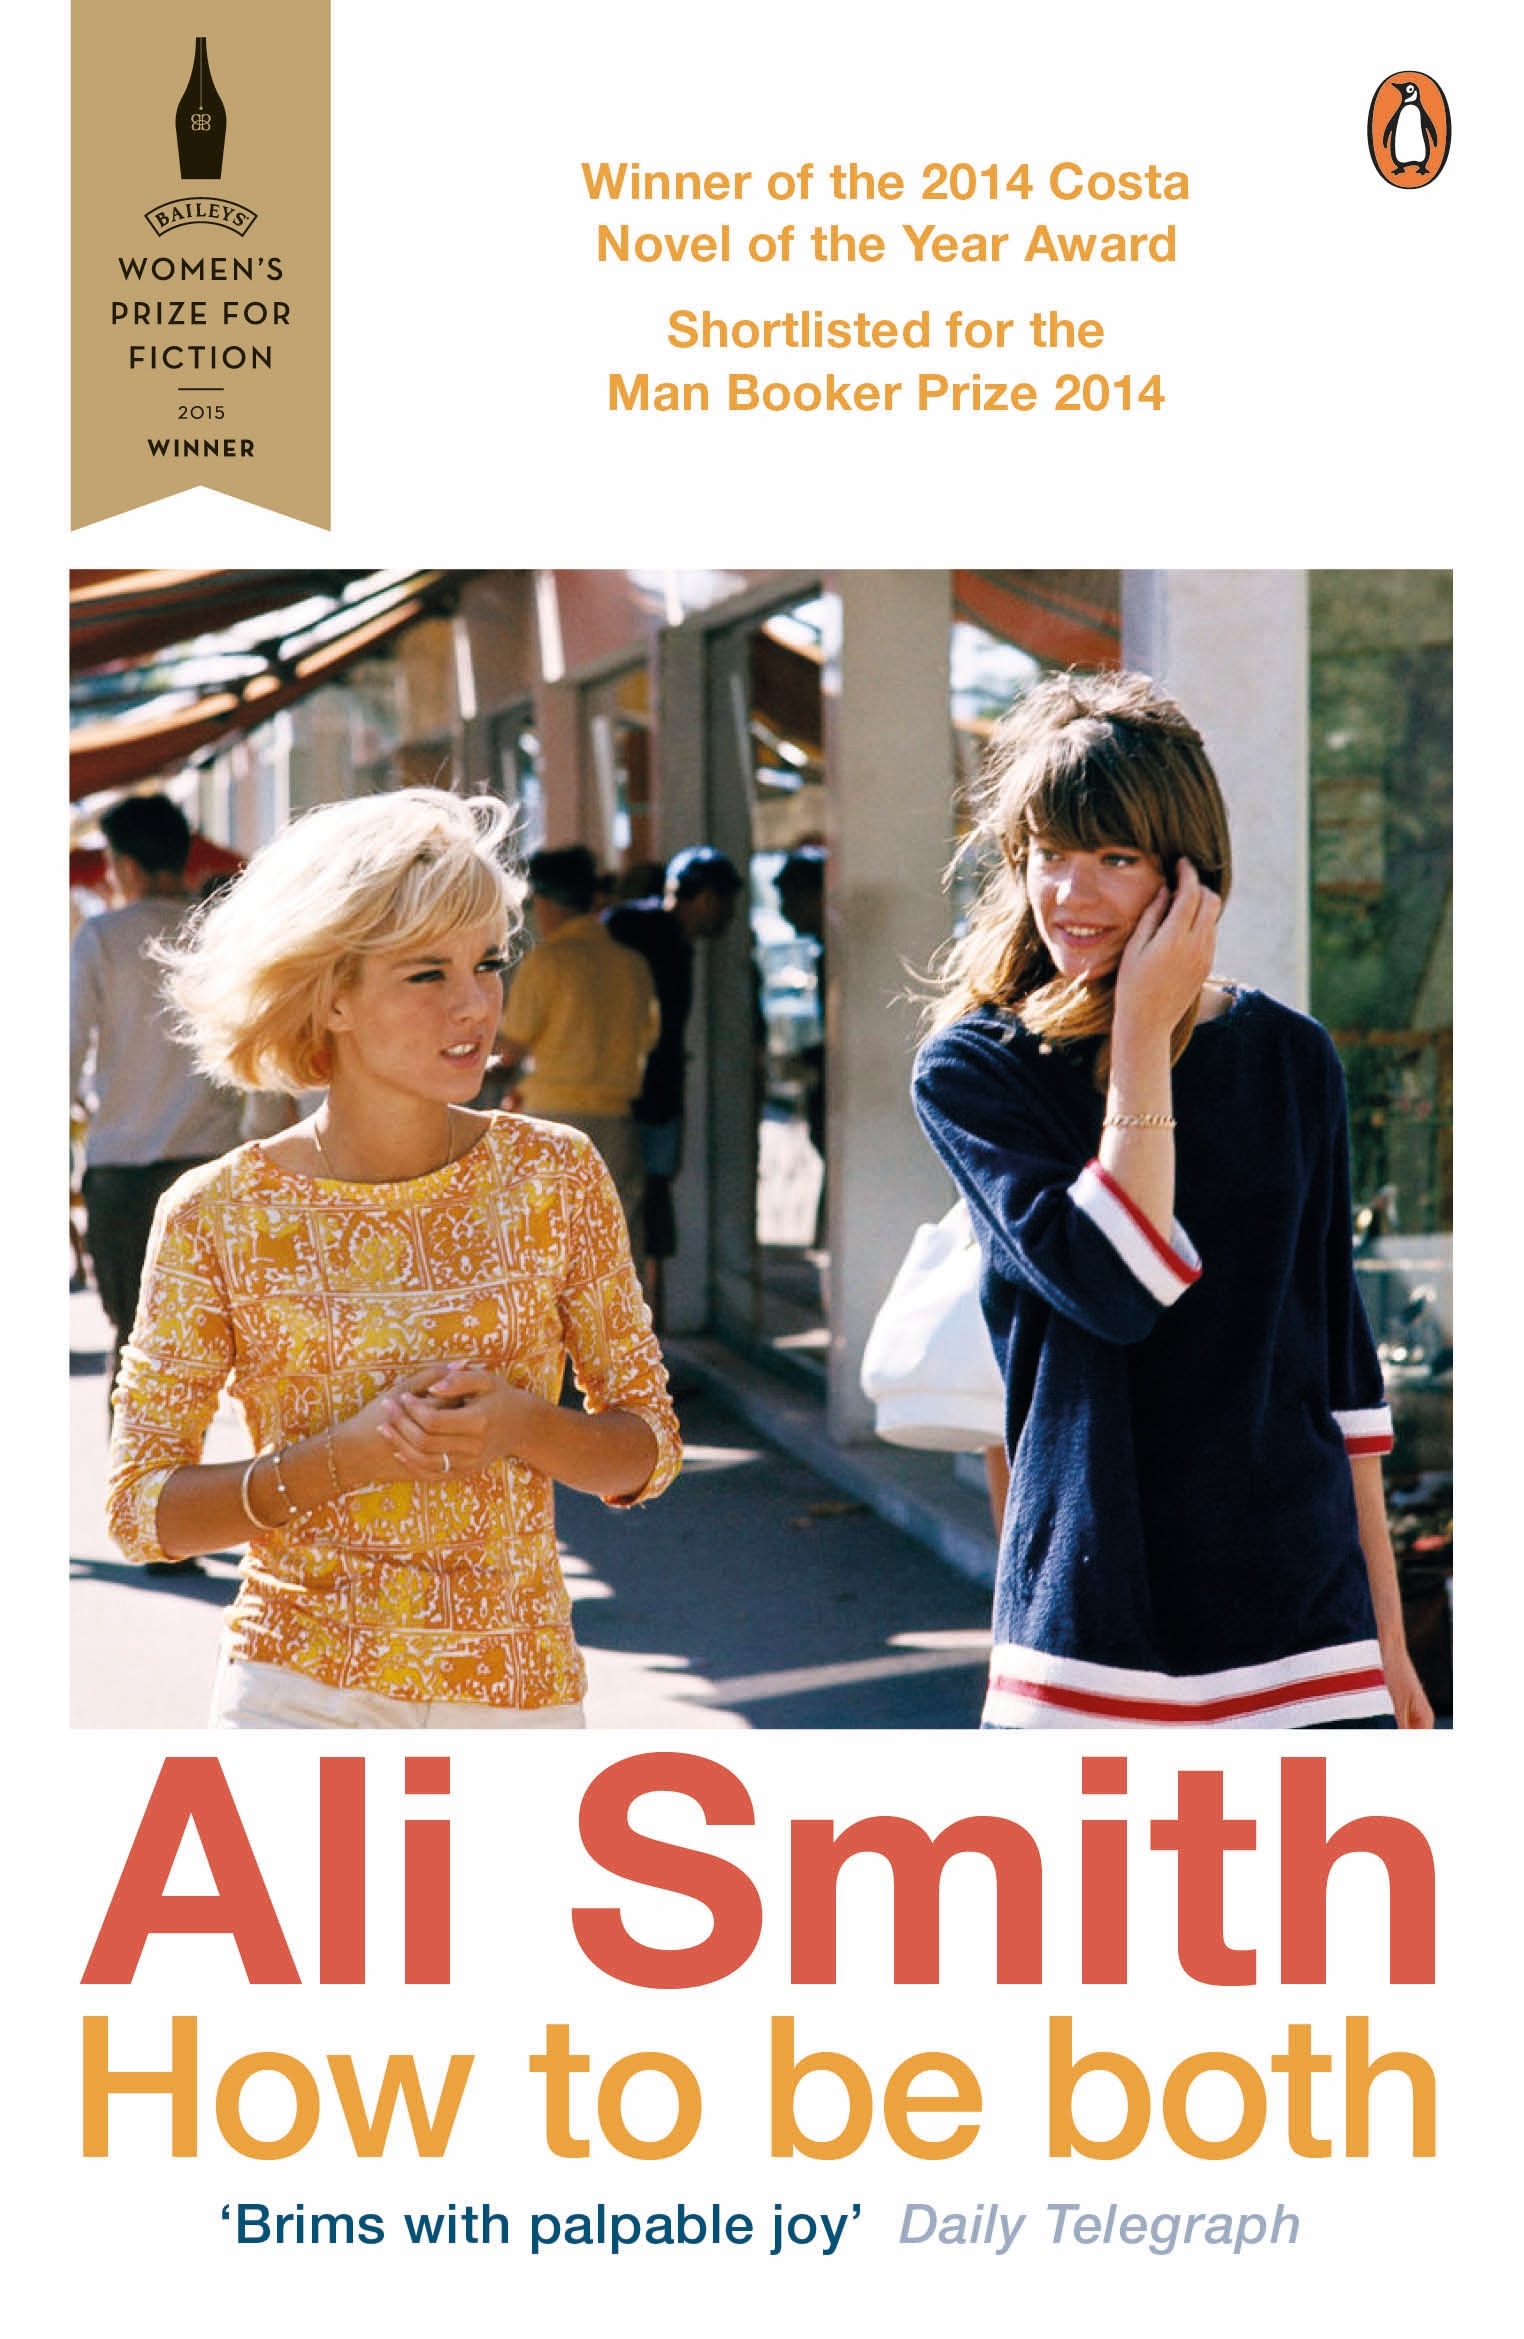 Book “How to be Both” by Ali Smith — April 16, 2015